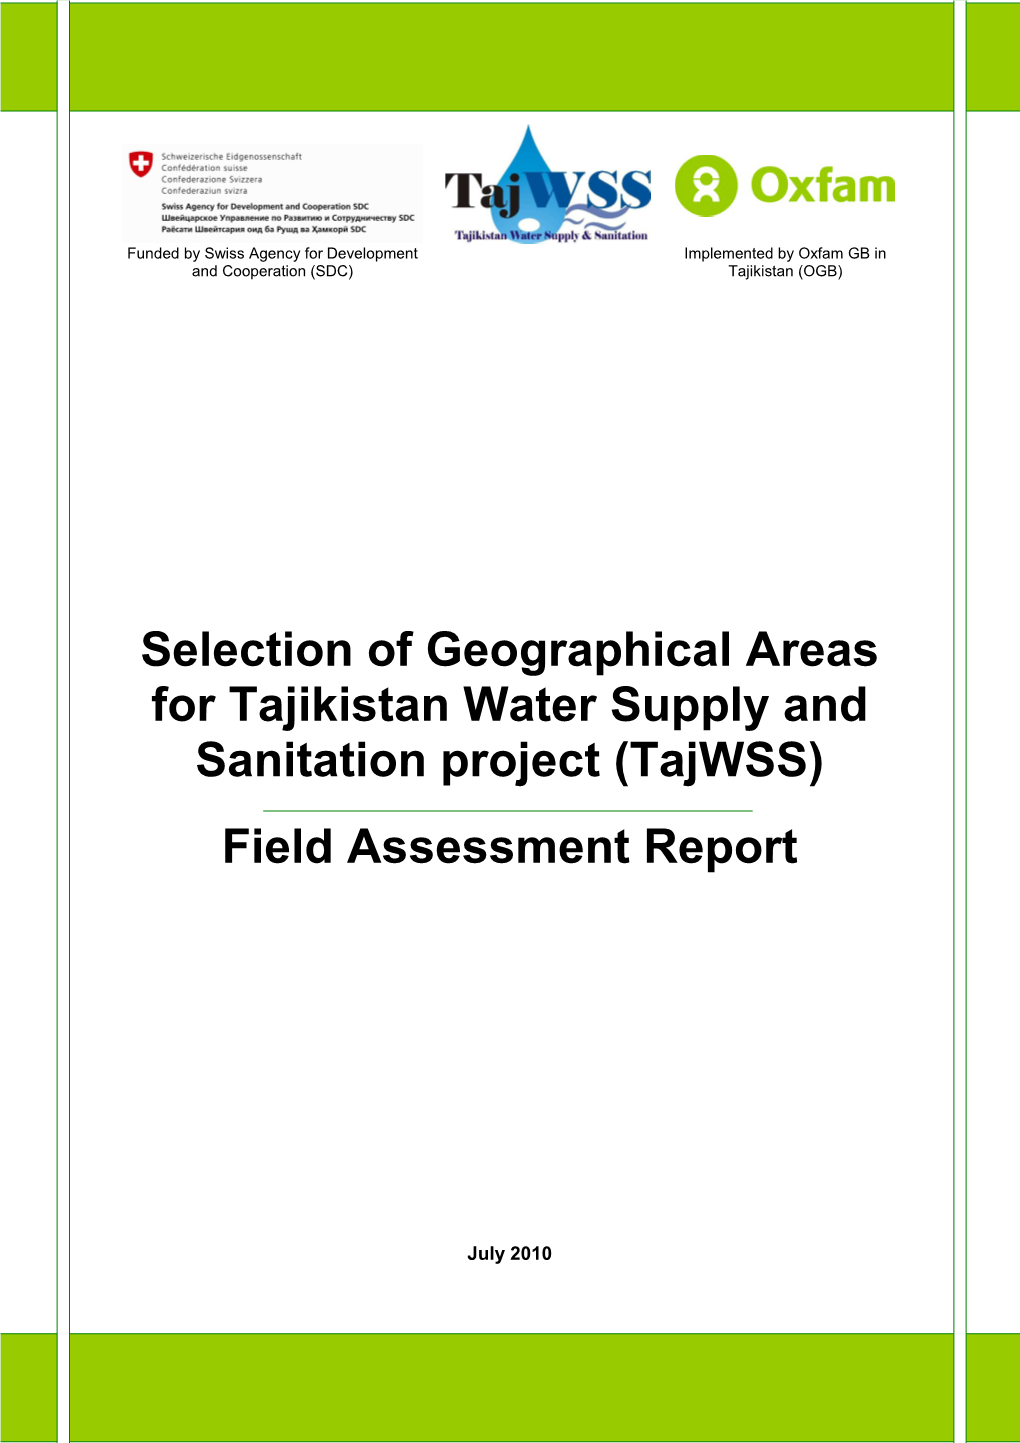 Selection of Geographical Areas for Tajikistan Water Supply and Sanitation Project (Tajwss)